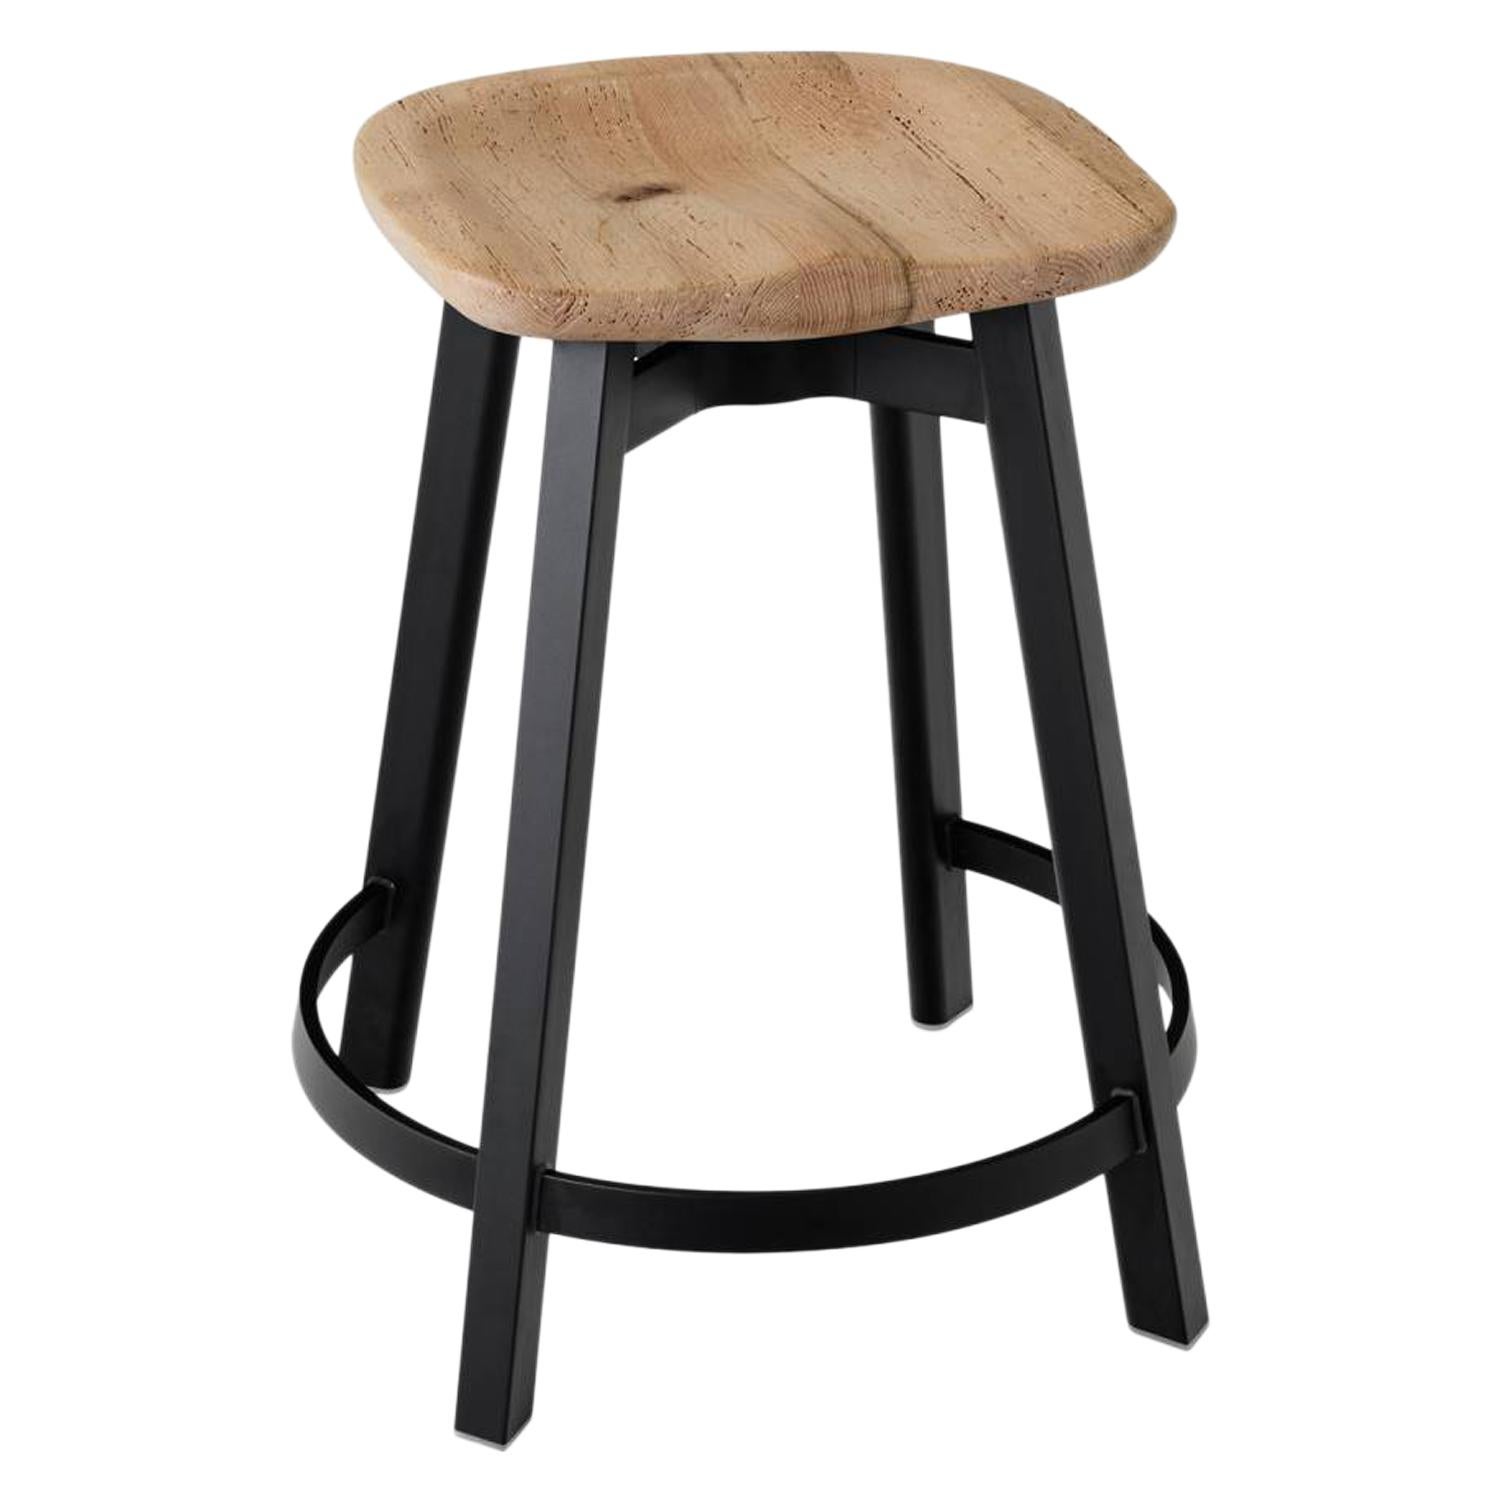 Emeco Su Counter Stool in Black Aluminum with Reclaimed Oak Seat by Nendo